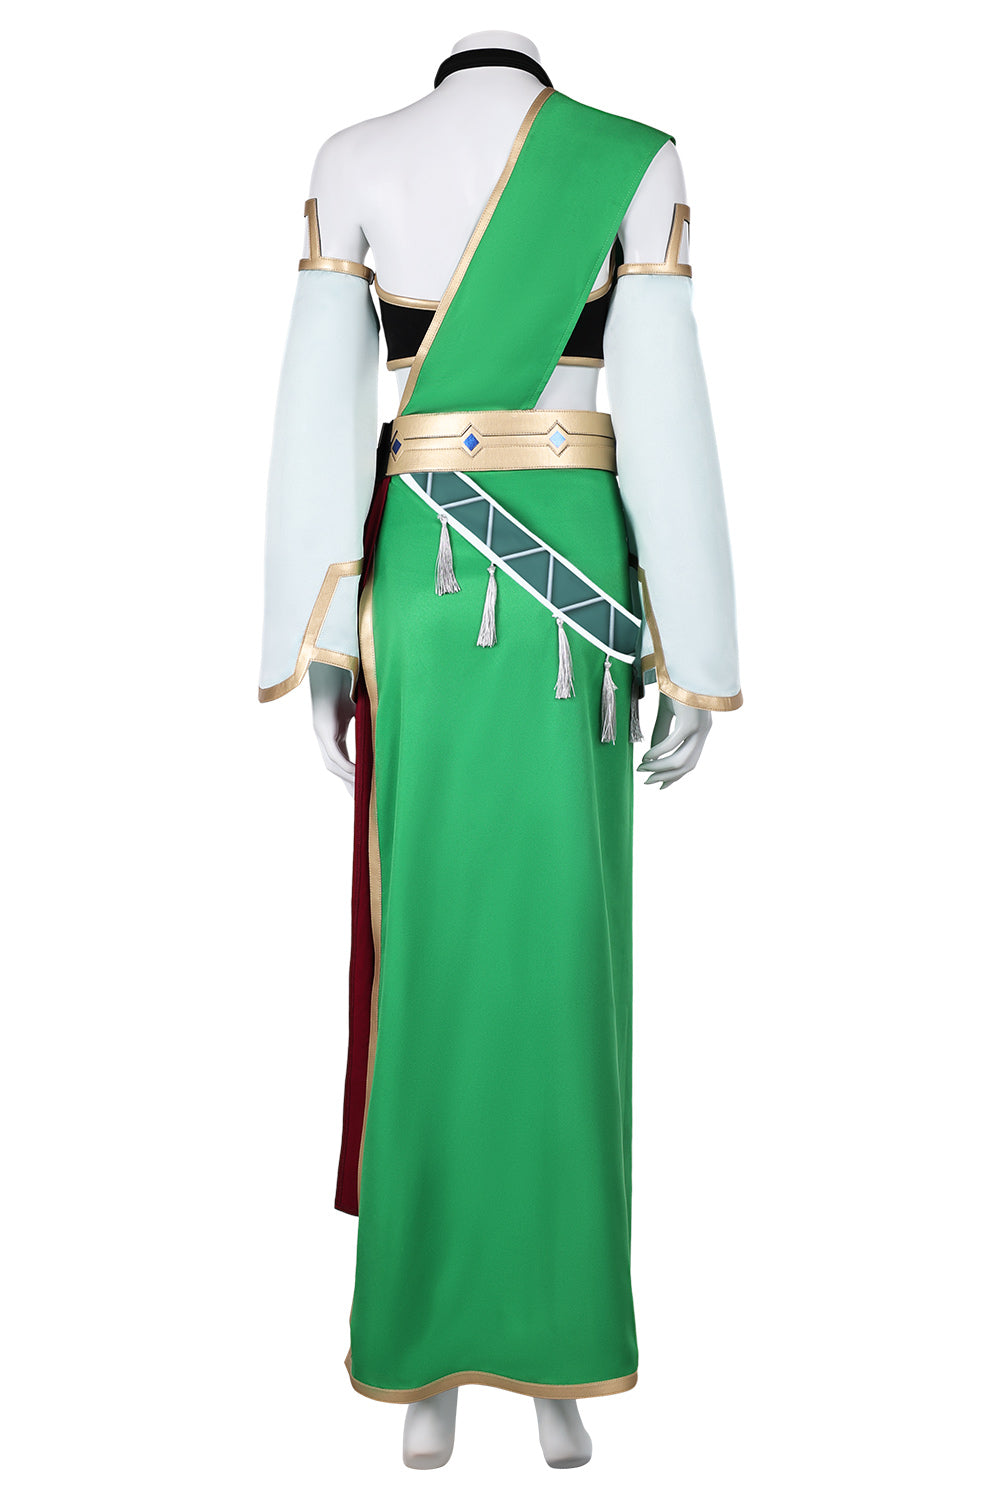 SeeCosplay Game Palworld Lily Outfits Halloween Carnival Suit Cosplay Costume